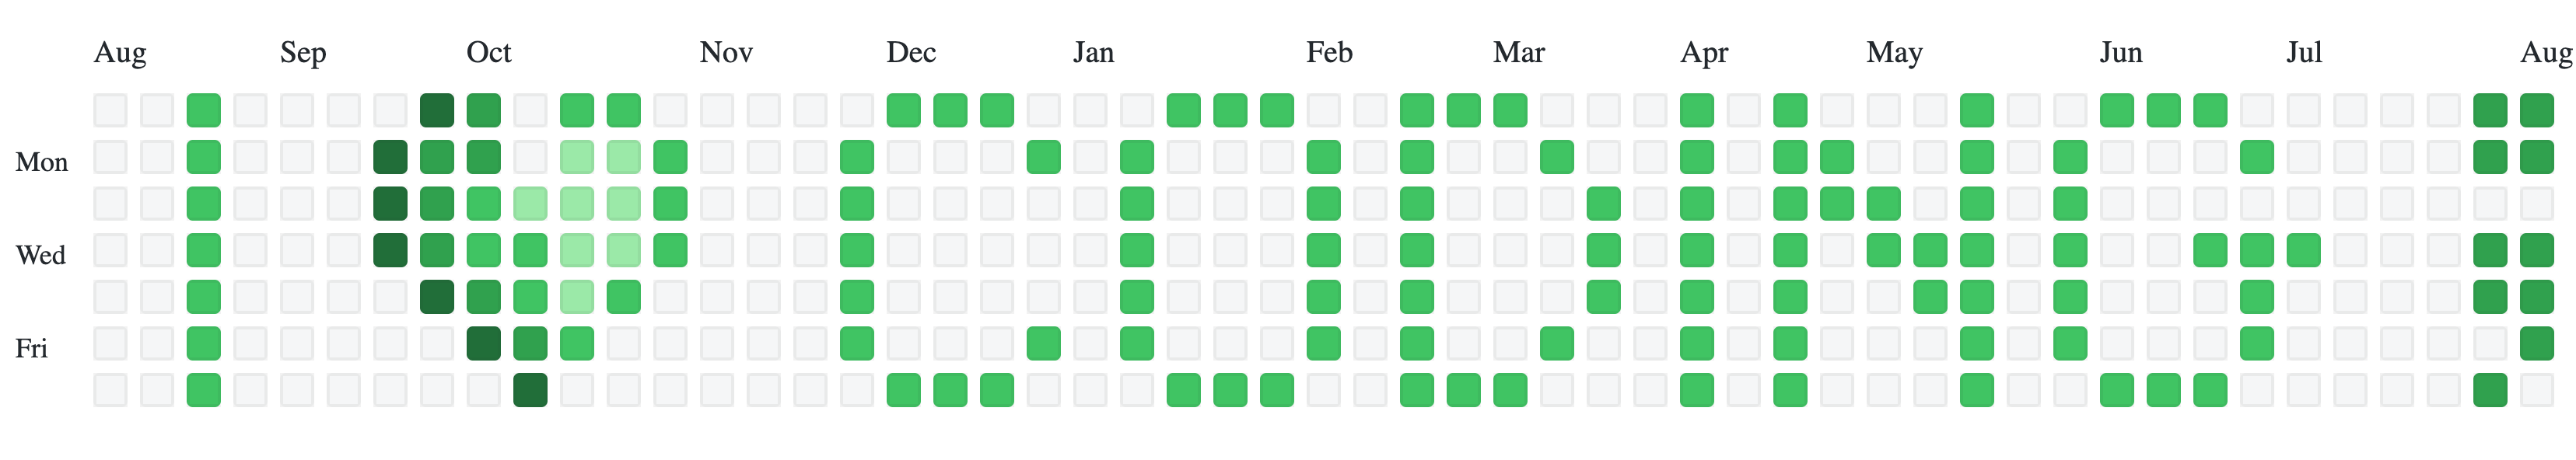 GitHub contribution graph where contributions draw the letters I love coding semi-column